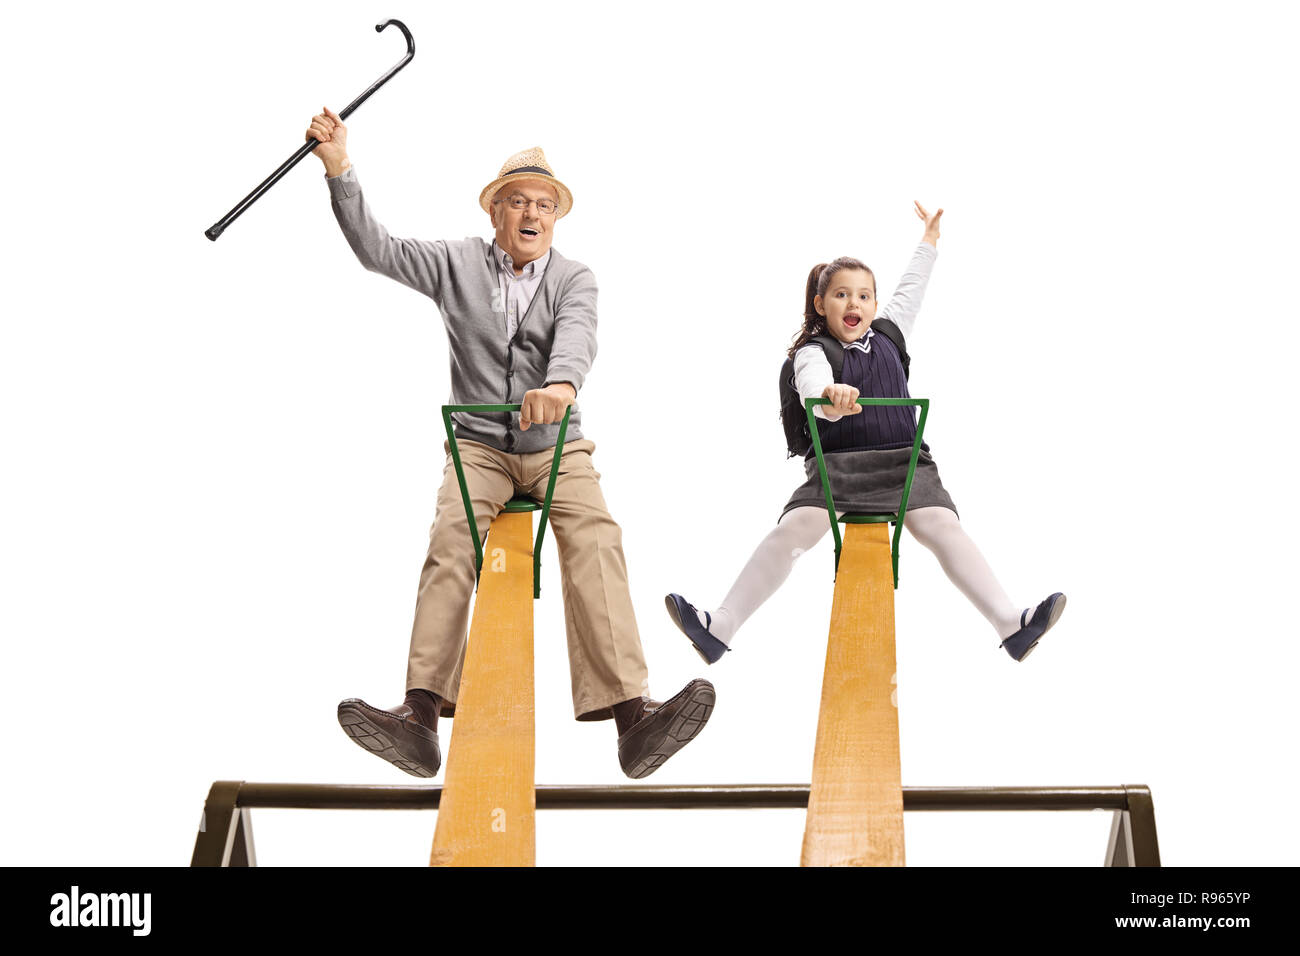 Cheerful grandpa and his granddaughter having fun on a seesaw isolated on white background Stock Photo